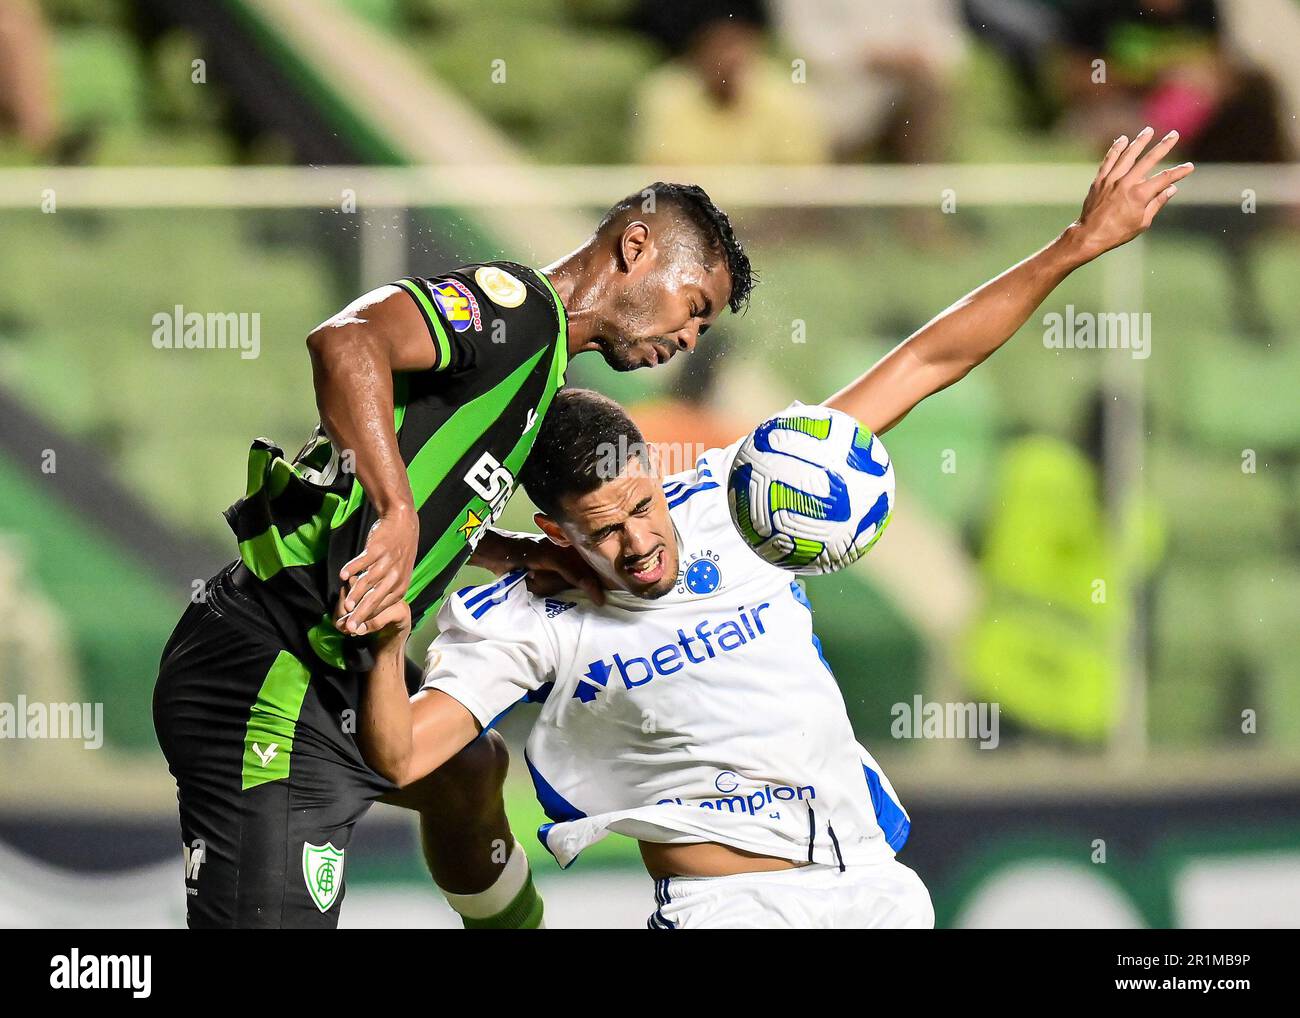 Belo Horizonte, Brazil. 14th May, 2023. Ricardo Silva of America Mineiro battles for possession with Lucas Oliveira of Cruzeiro, during the match between America Mineiro and Cruzeiro, for the Brazilian Serie A 2023, at Arena Independencia Stadium, in Belo Horizonte on May 14. Photo: Gledston Tavares/DiaEsportivo/Alamy Live News Credit: DiaEsportivo/Alamy Live News Stock Photo